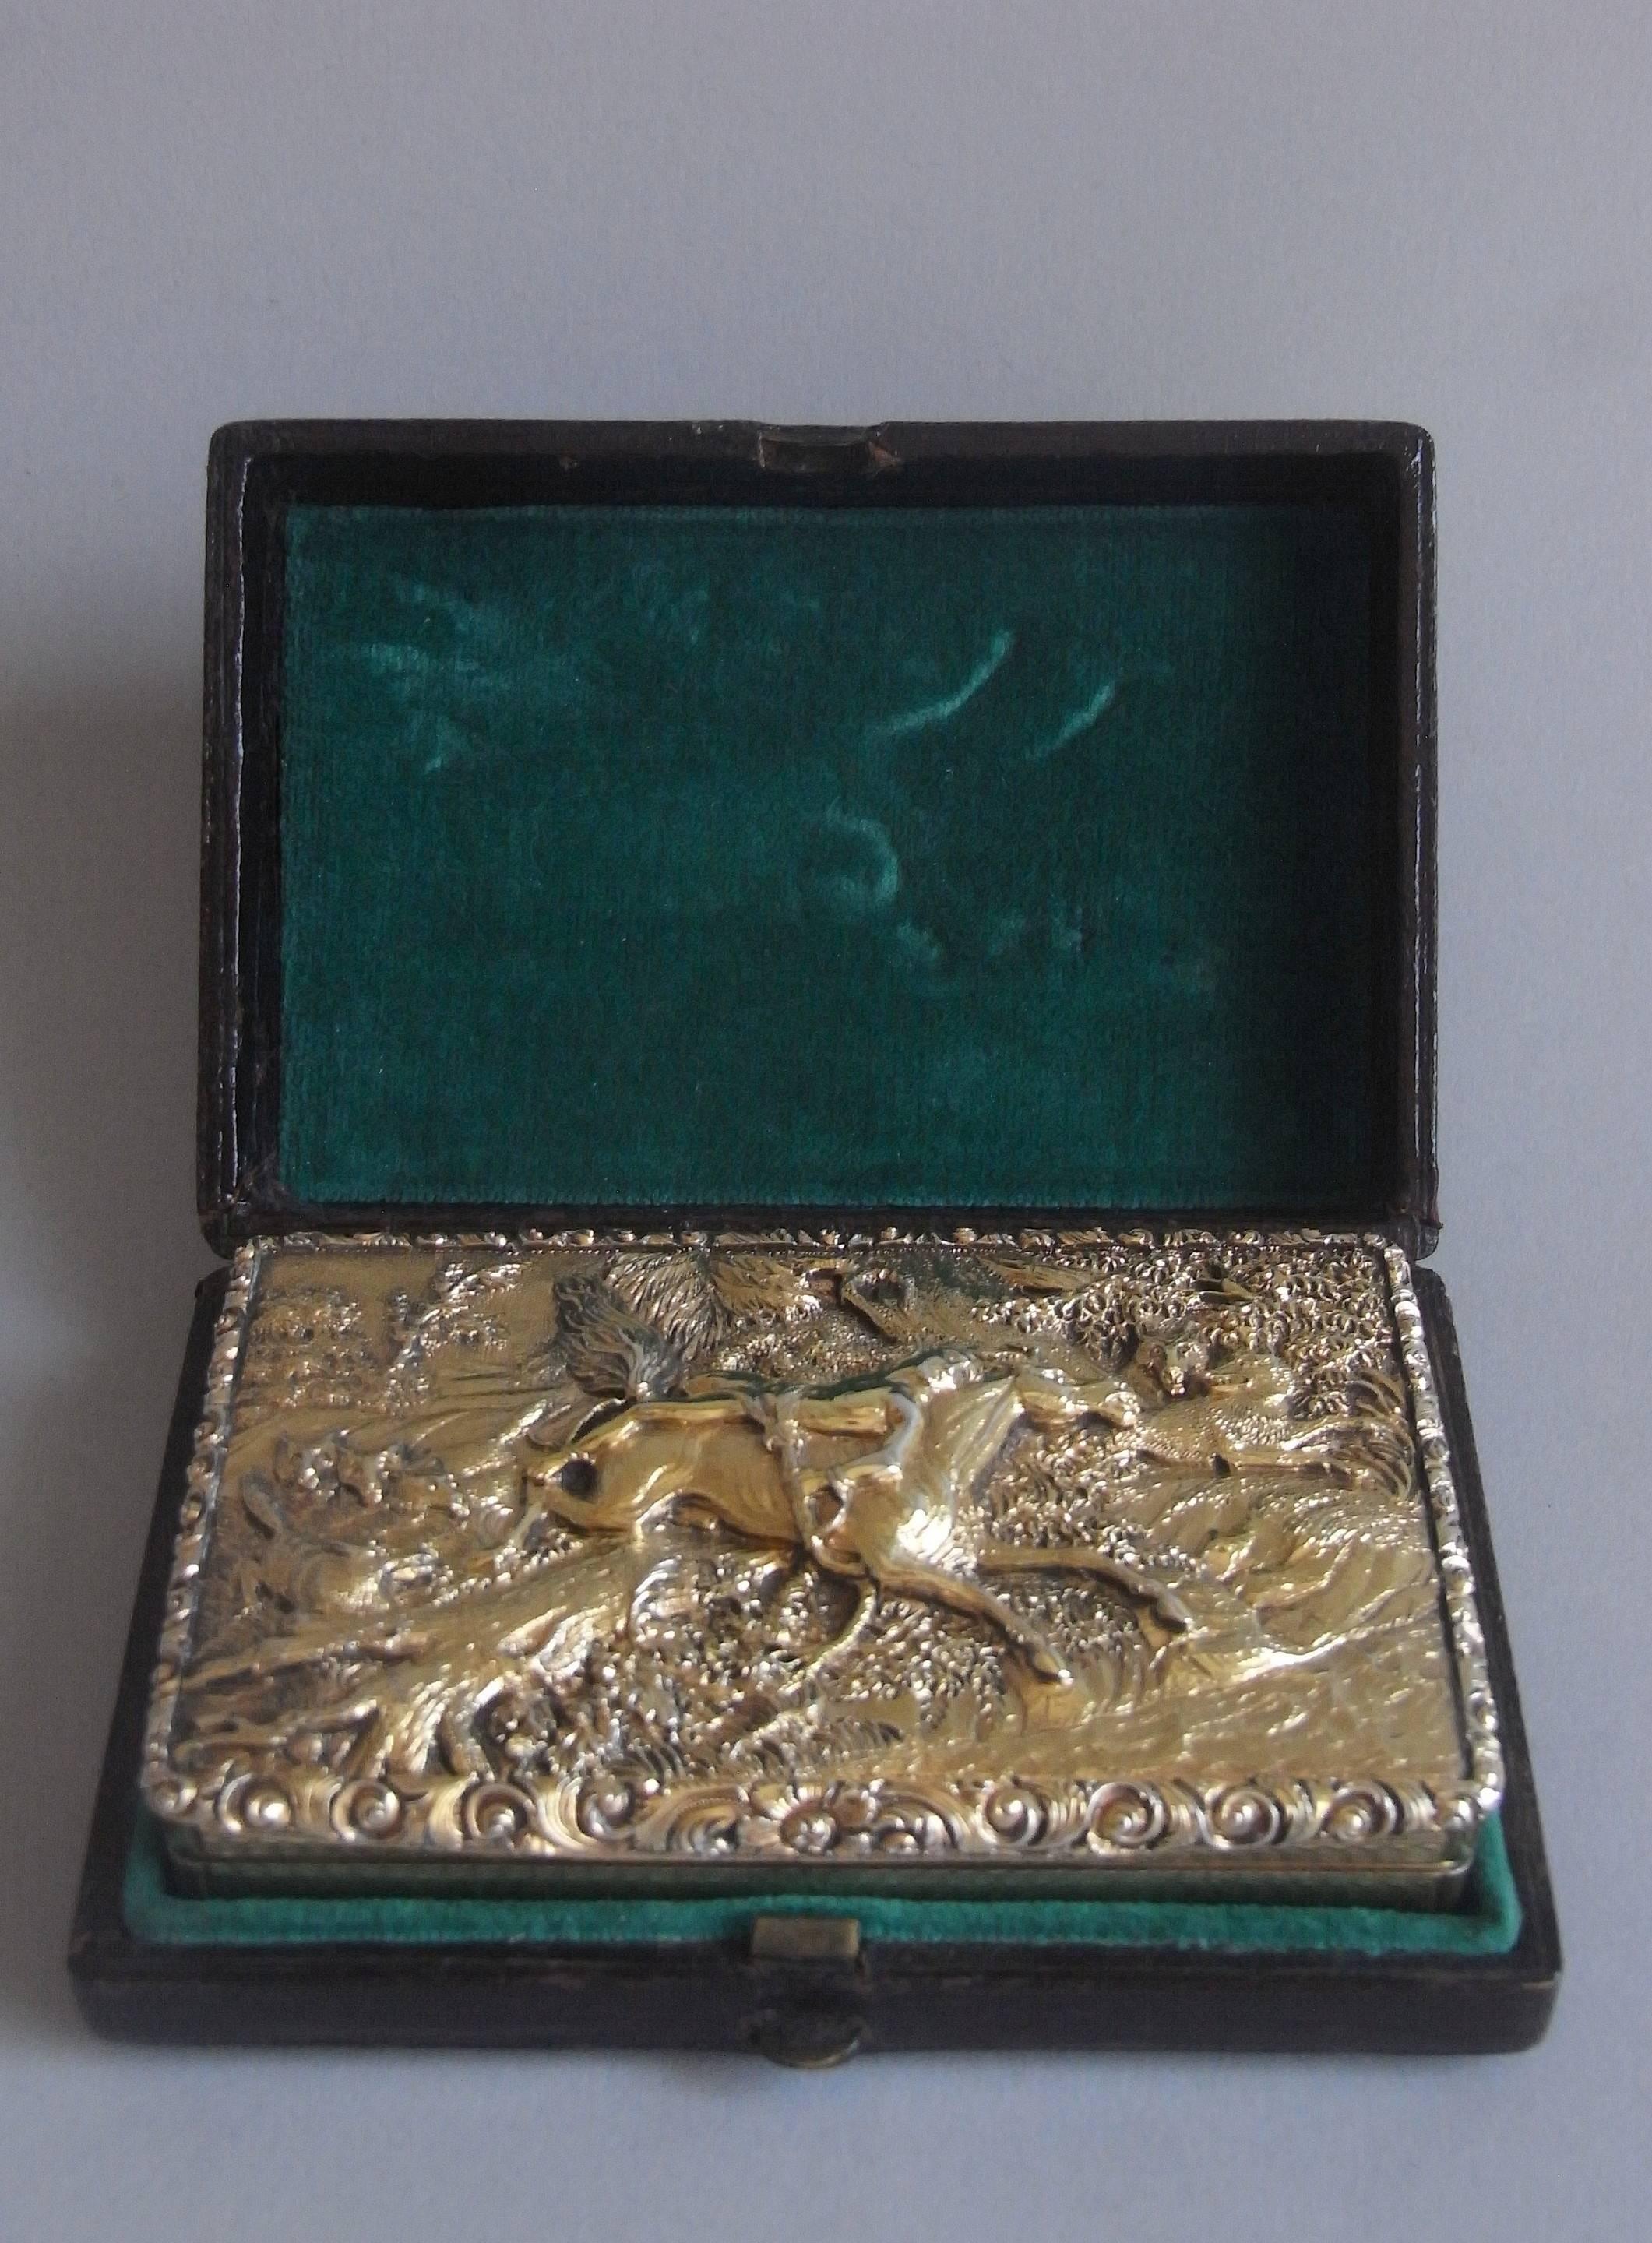 19th Century THE MAZEPPA BOX - A very rare and exceptional William IV Silver Gilt Table Snuff